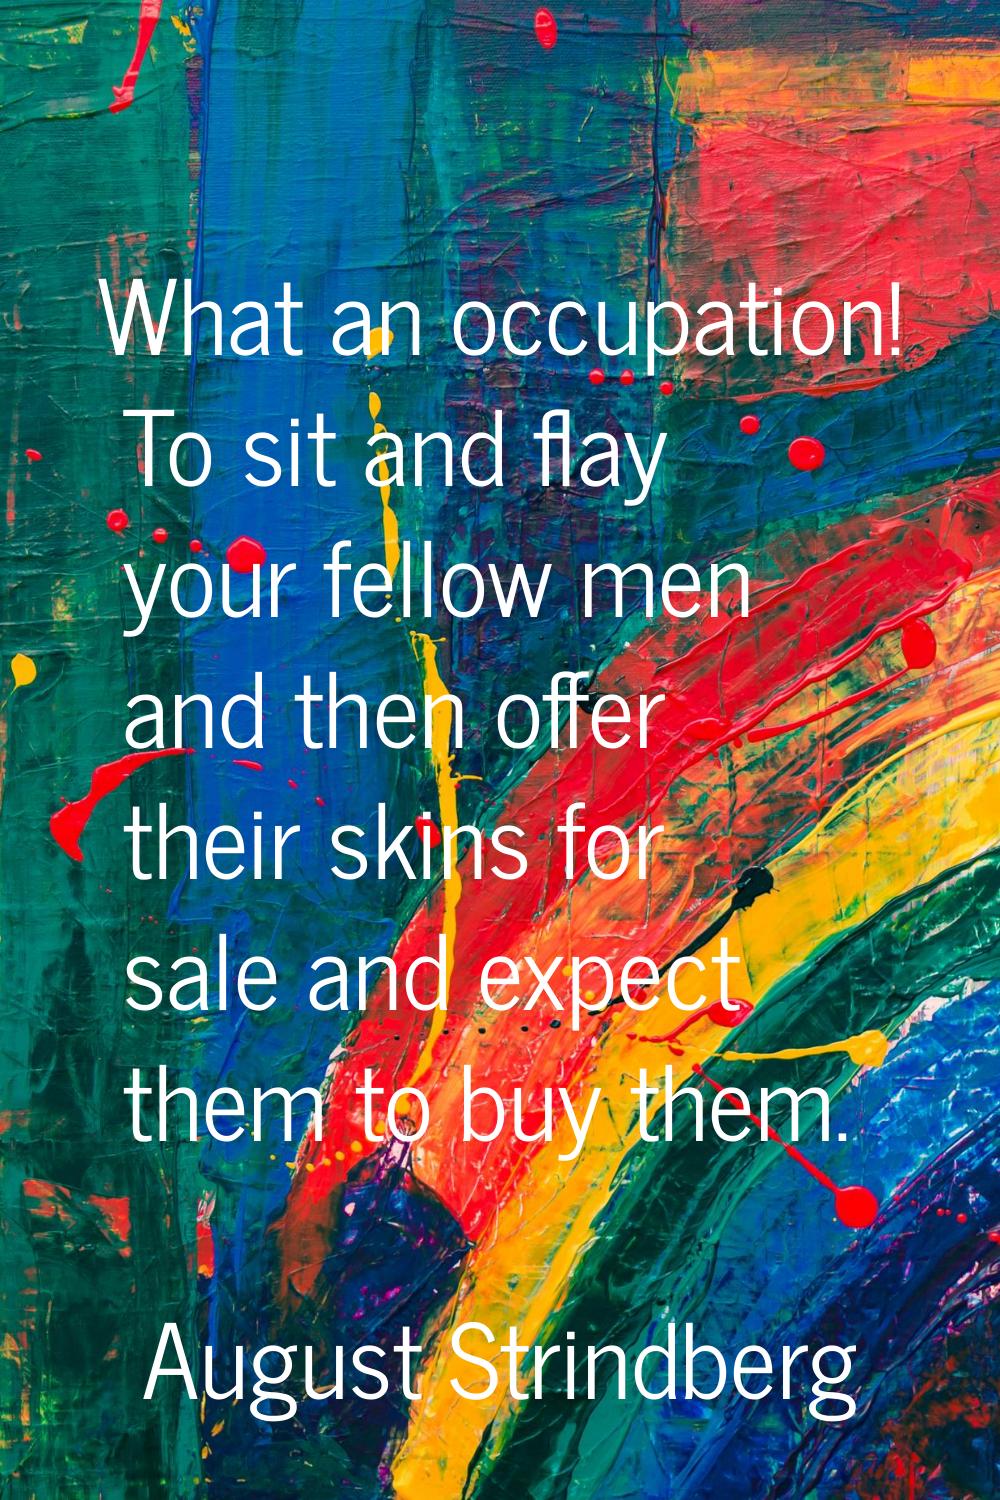 What an occupation! To sit and flay your fellow men and then offer their skins for sale and expect 